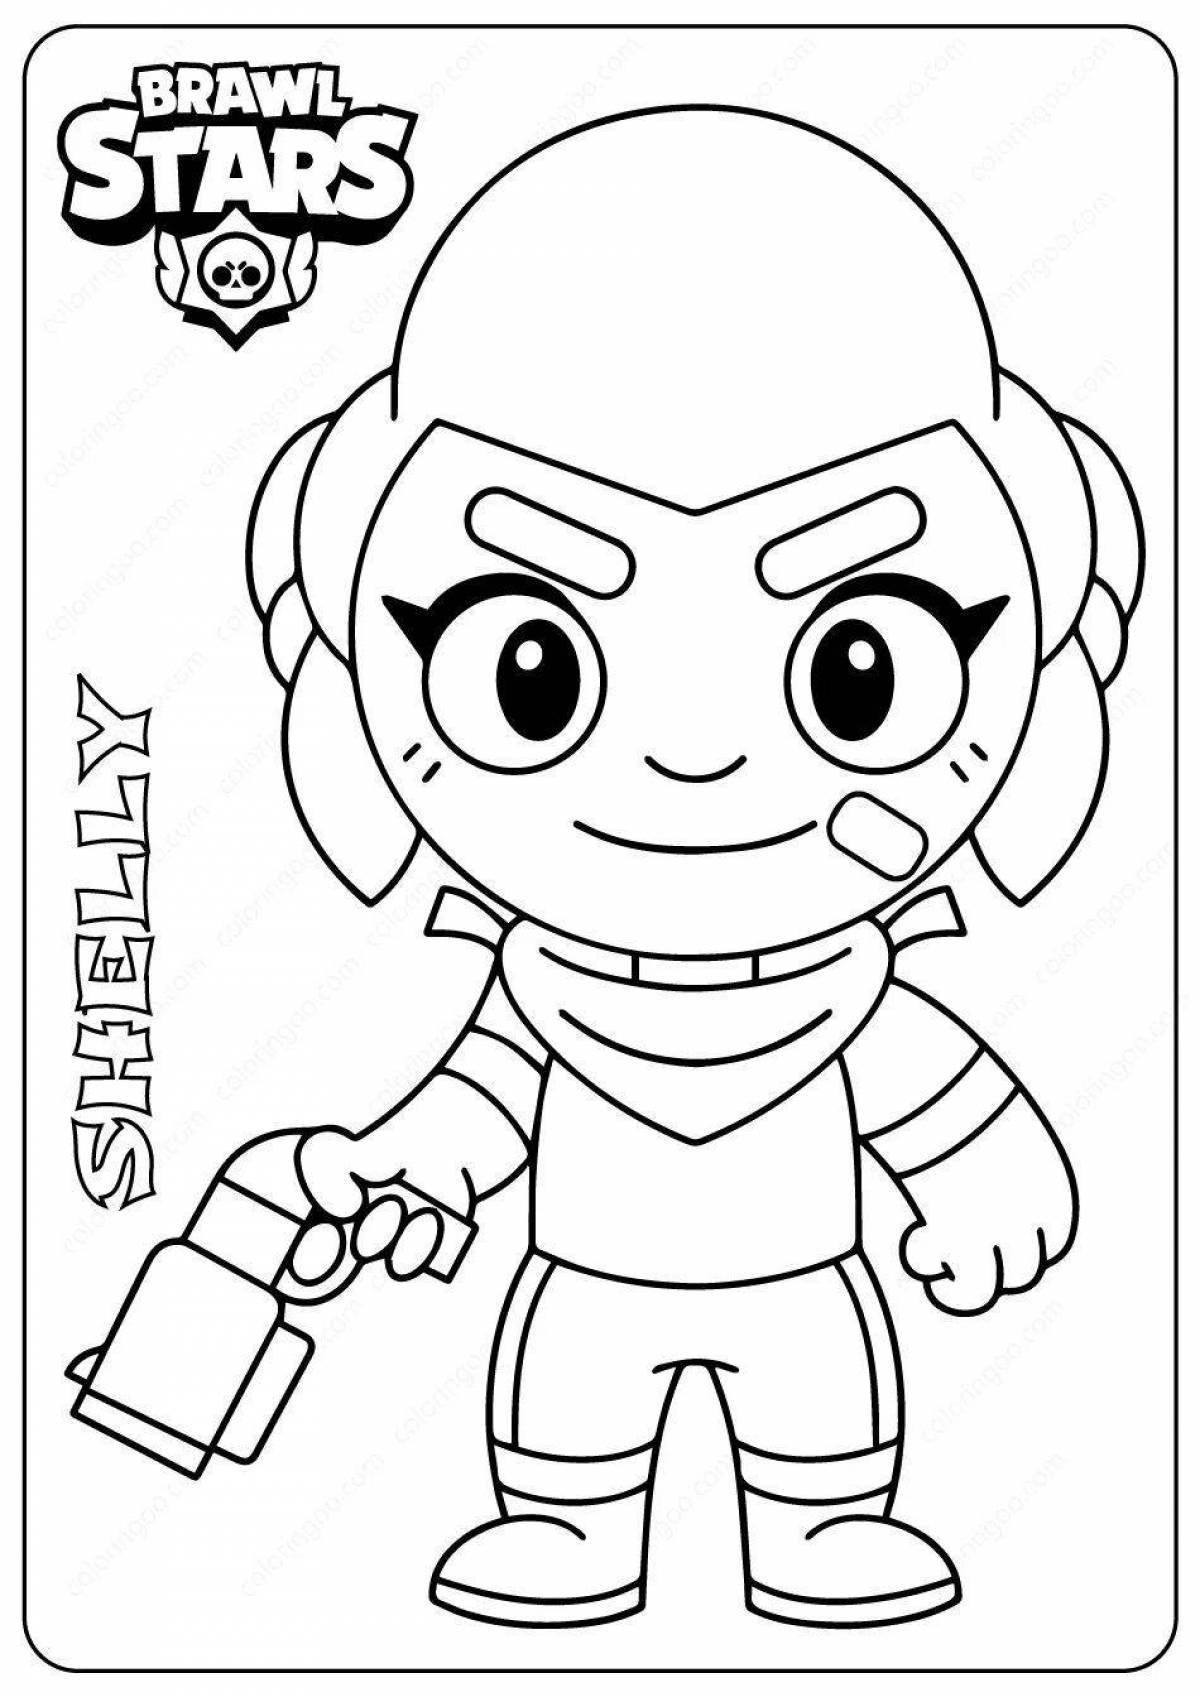 Brawl stars shelly live coloring